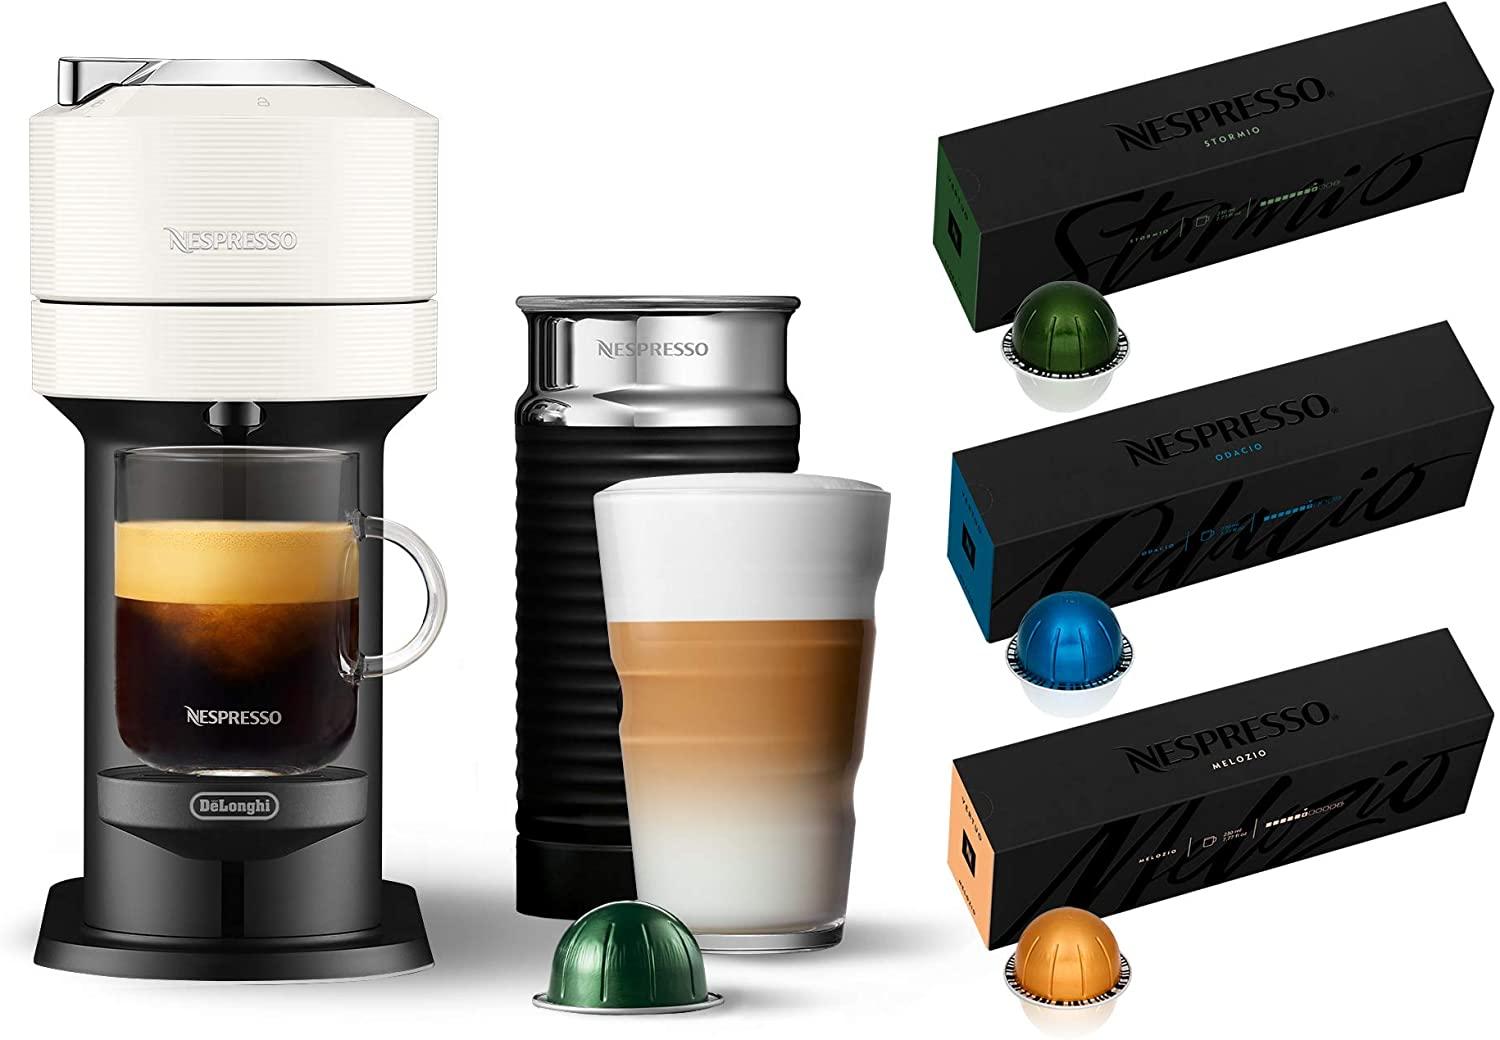 Nespresso Vertuo Next Coffee and Espresso Machine with Frother for $119.99 Shipped